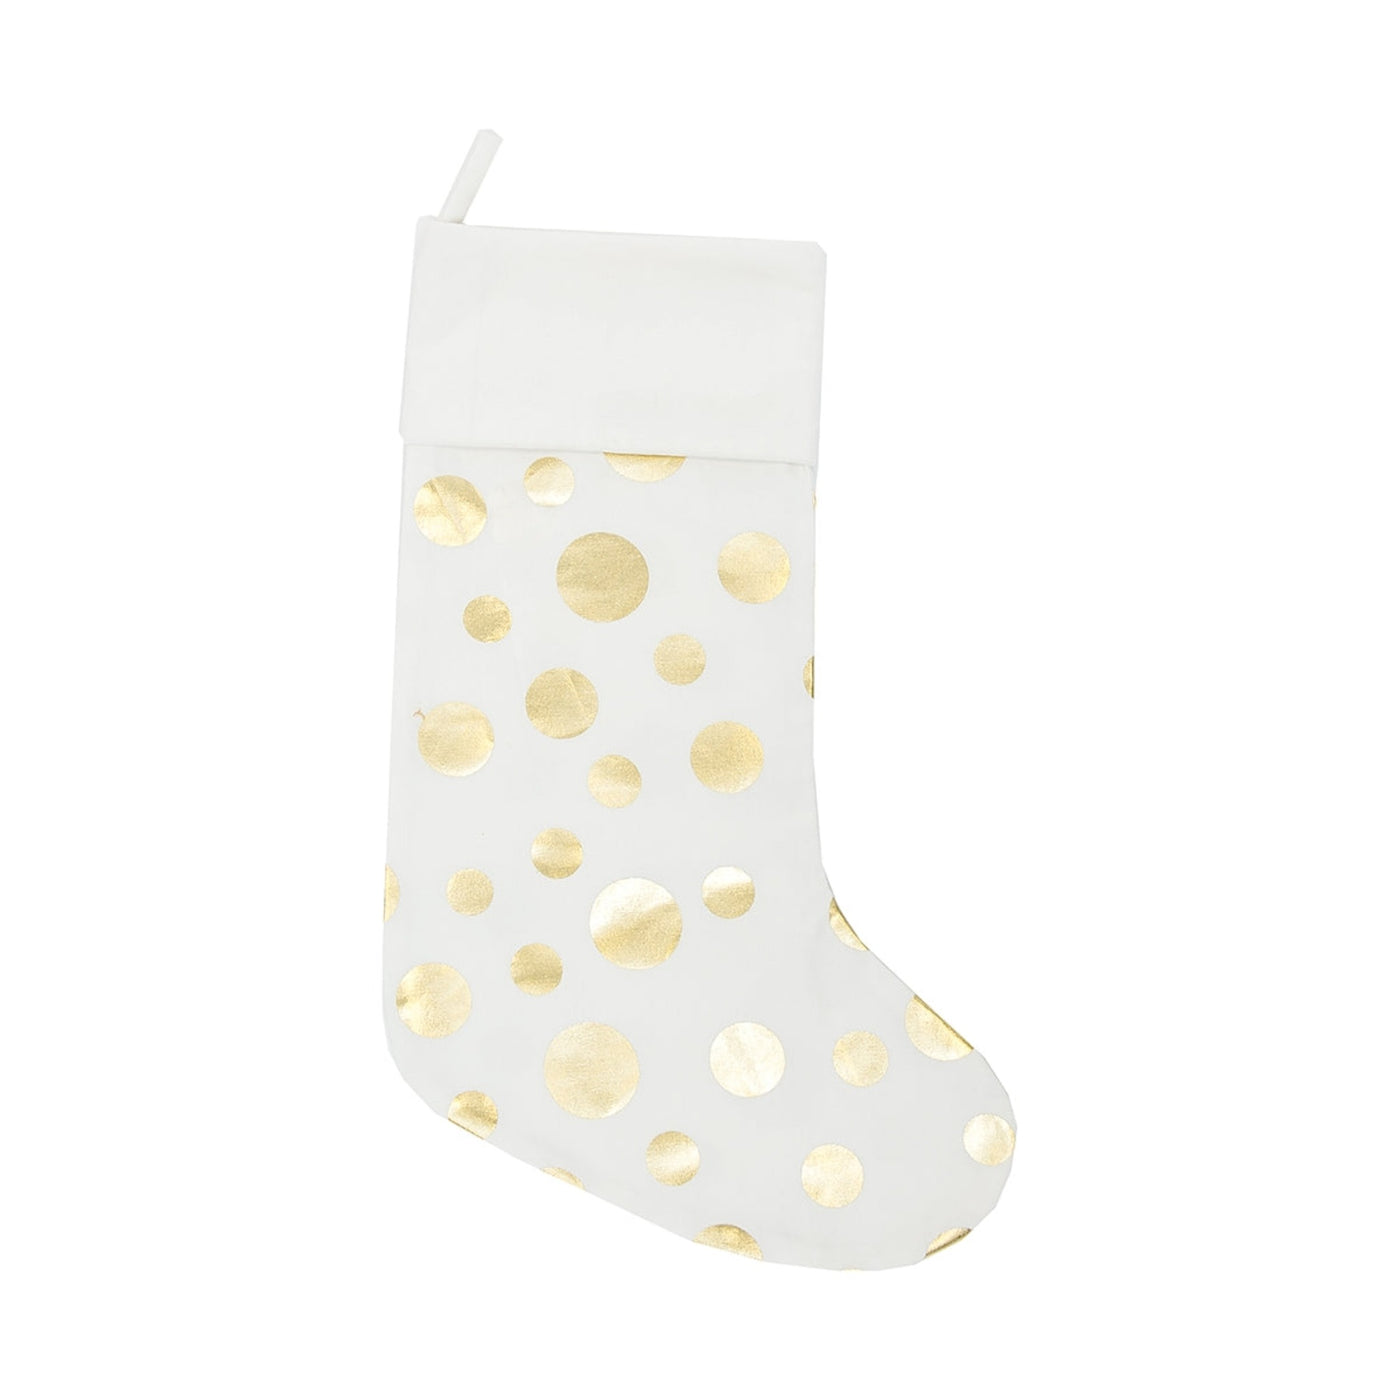 Glam Gold Dots Stocking